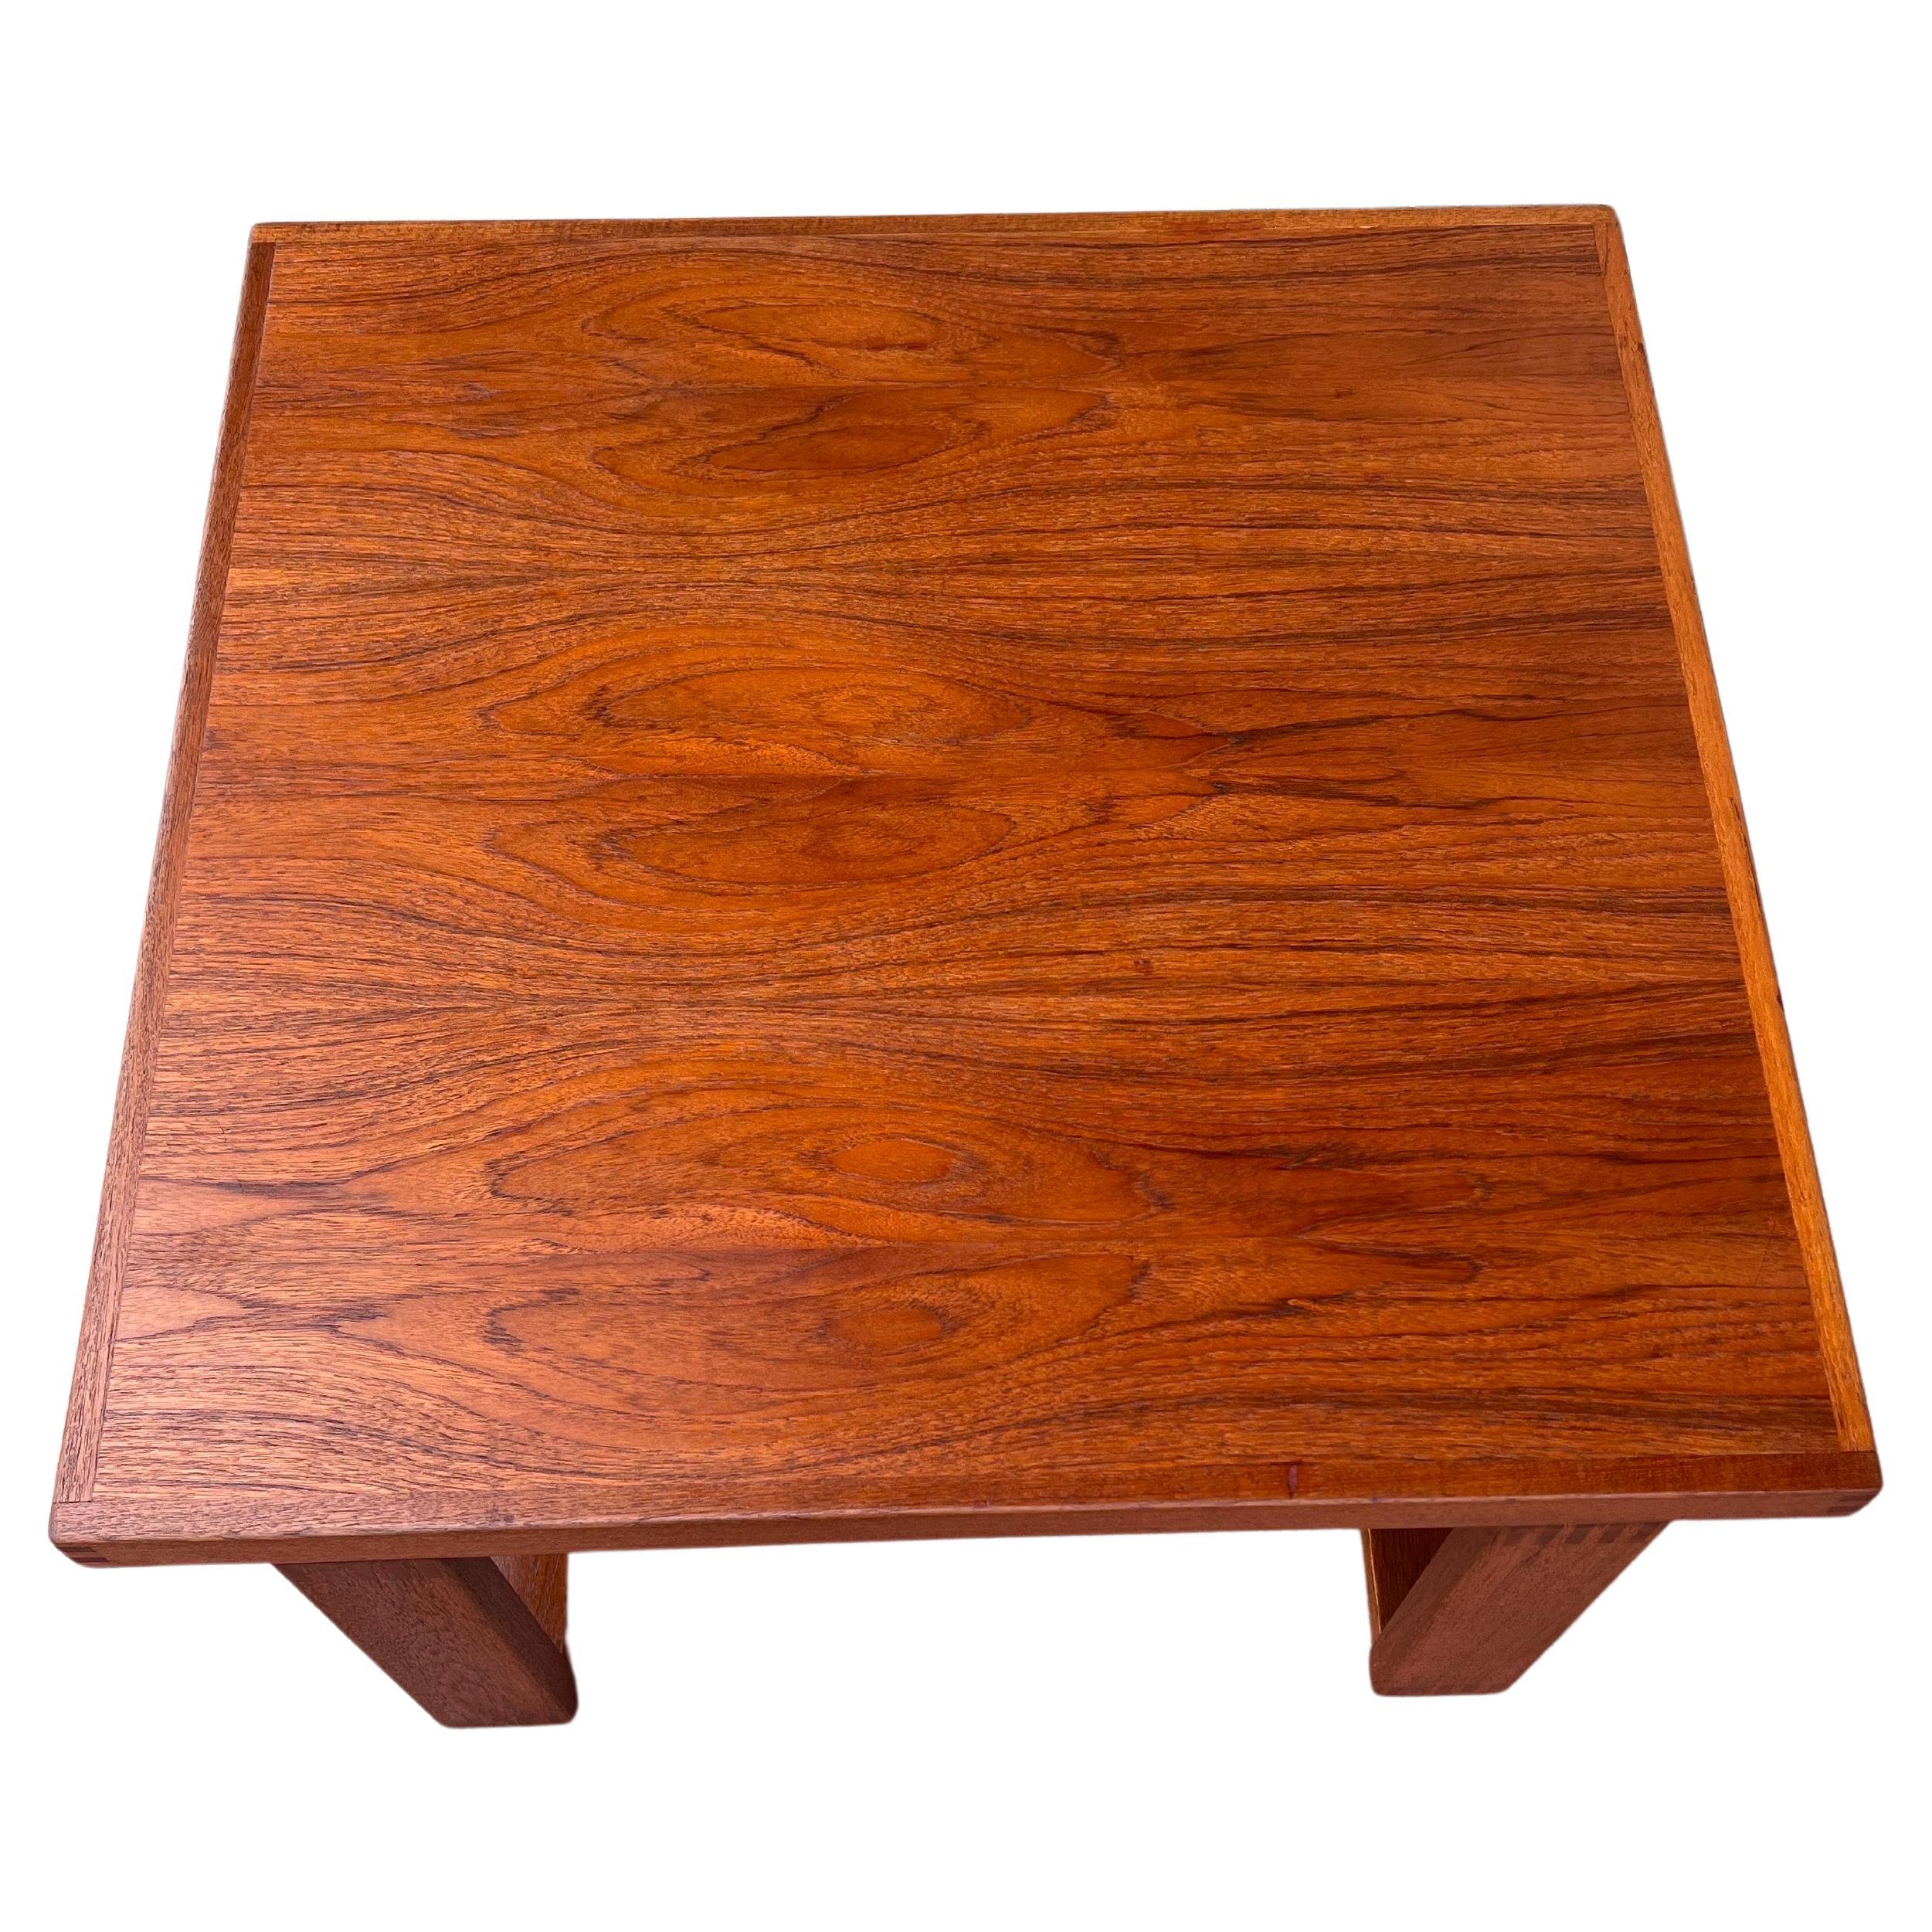 beautiful simple large square coffee table, in teak by Trioh, circa 1980s freshly refinished solid with nice dove tail corners and legs, great craftsmanship.